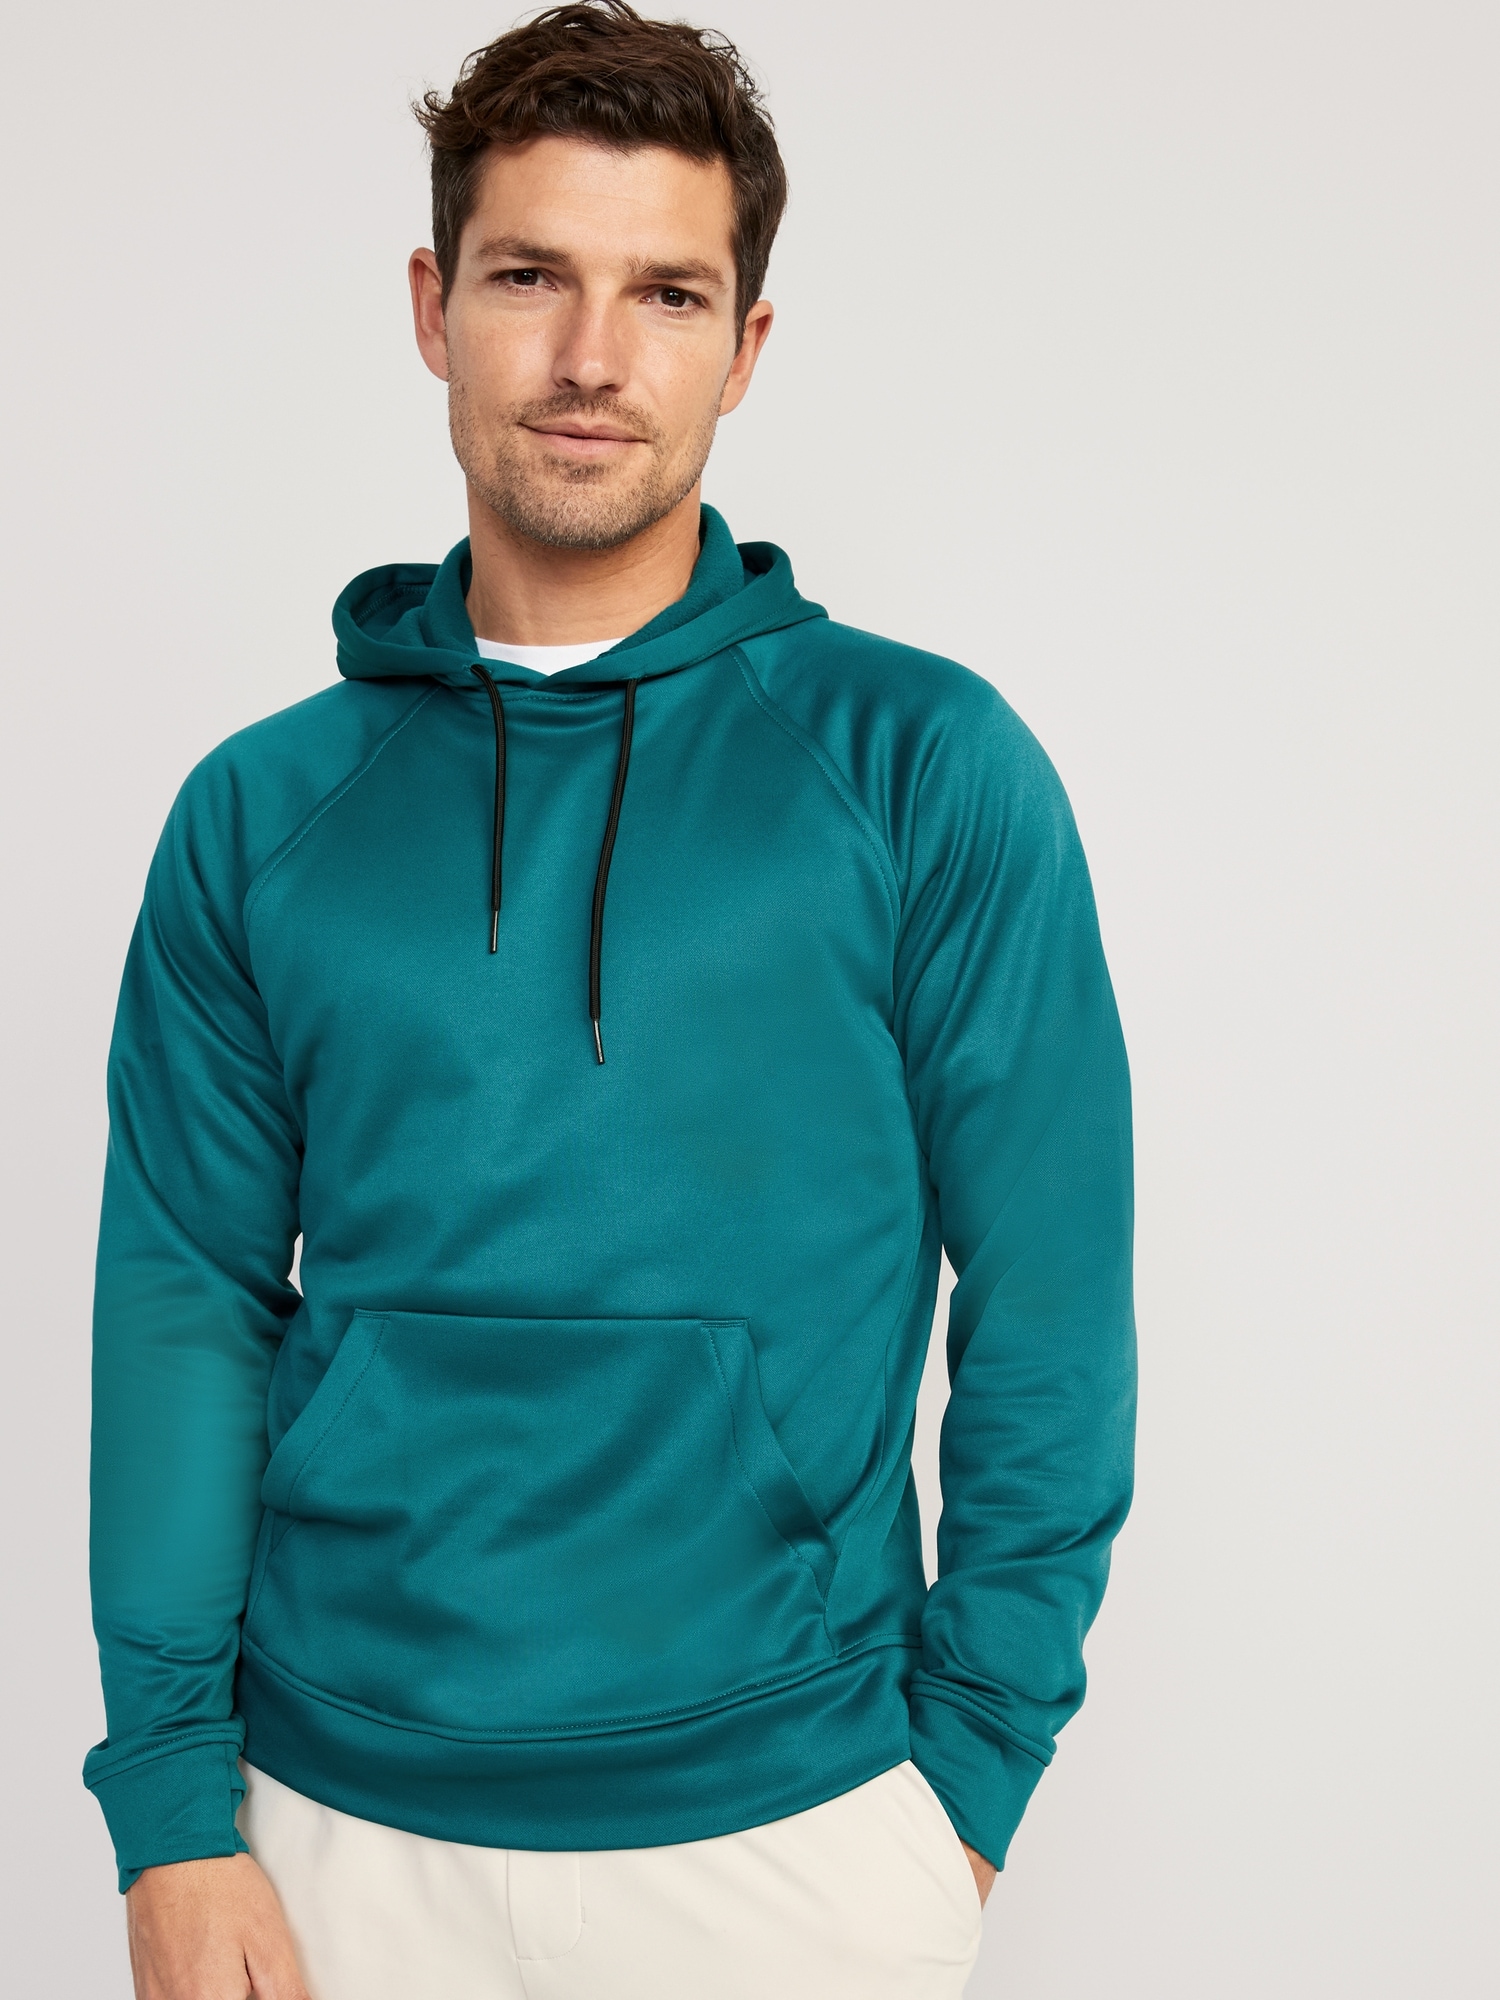 Old Navy Soft-Brushed Go-Dry Performance Pullover Hoodie for Men green. 1